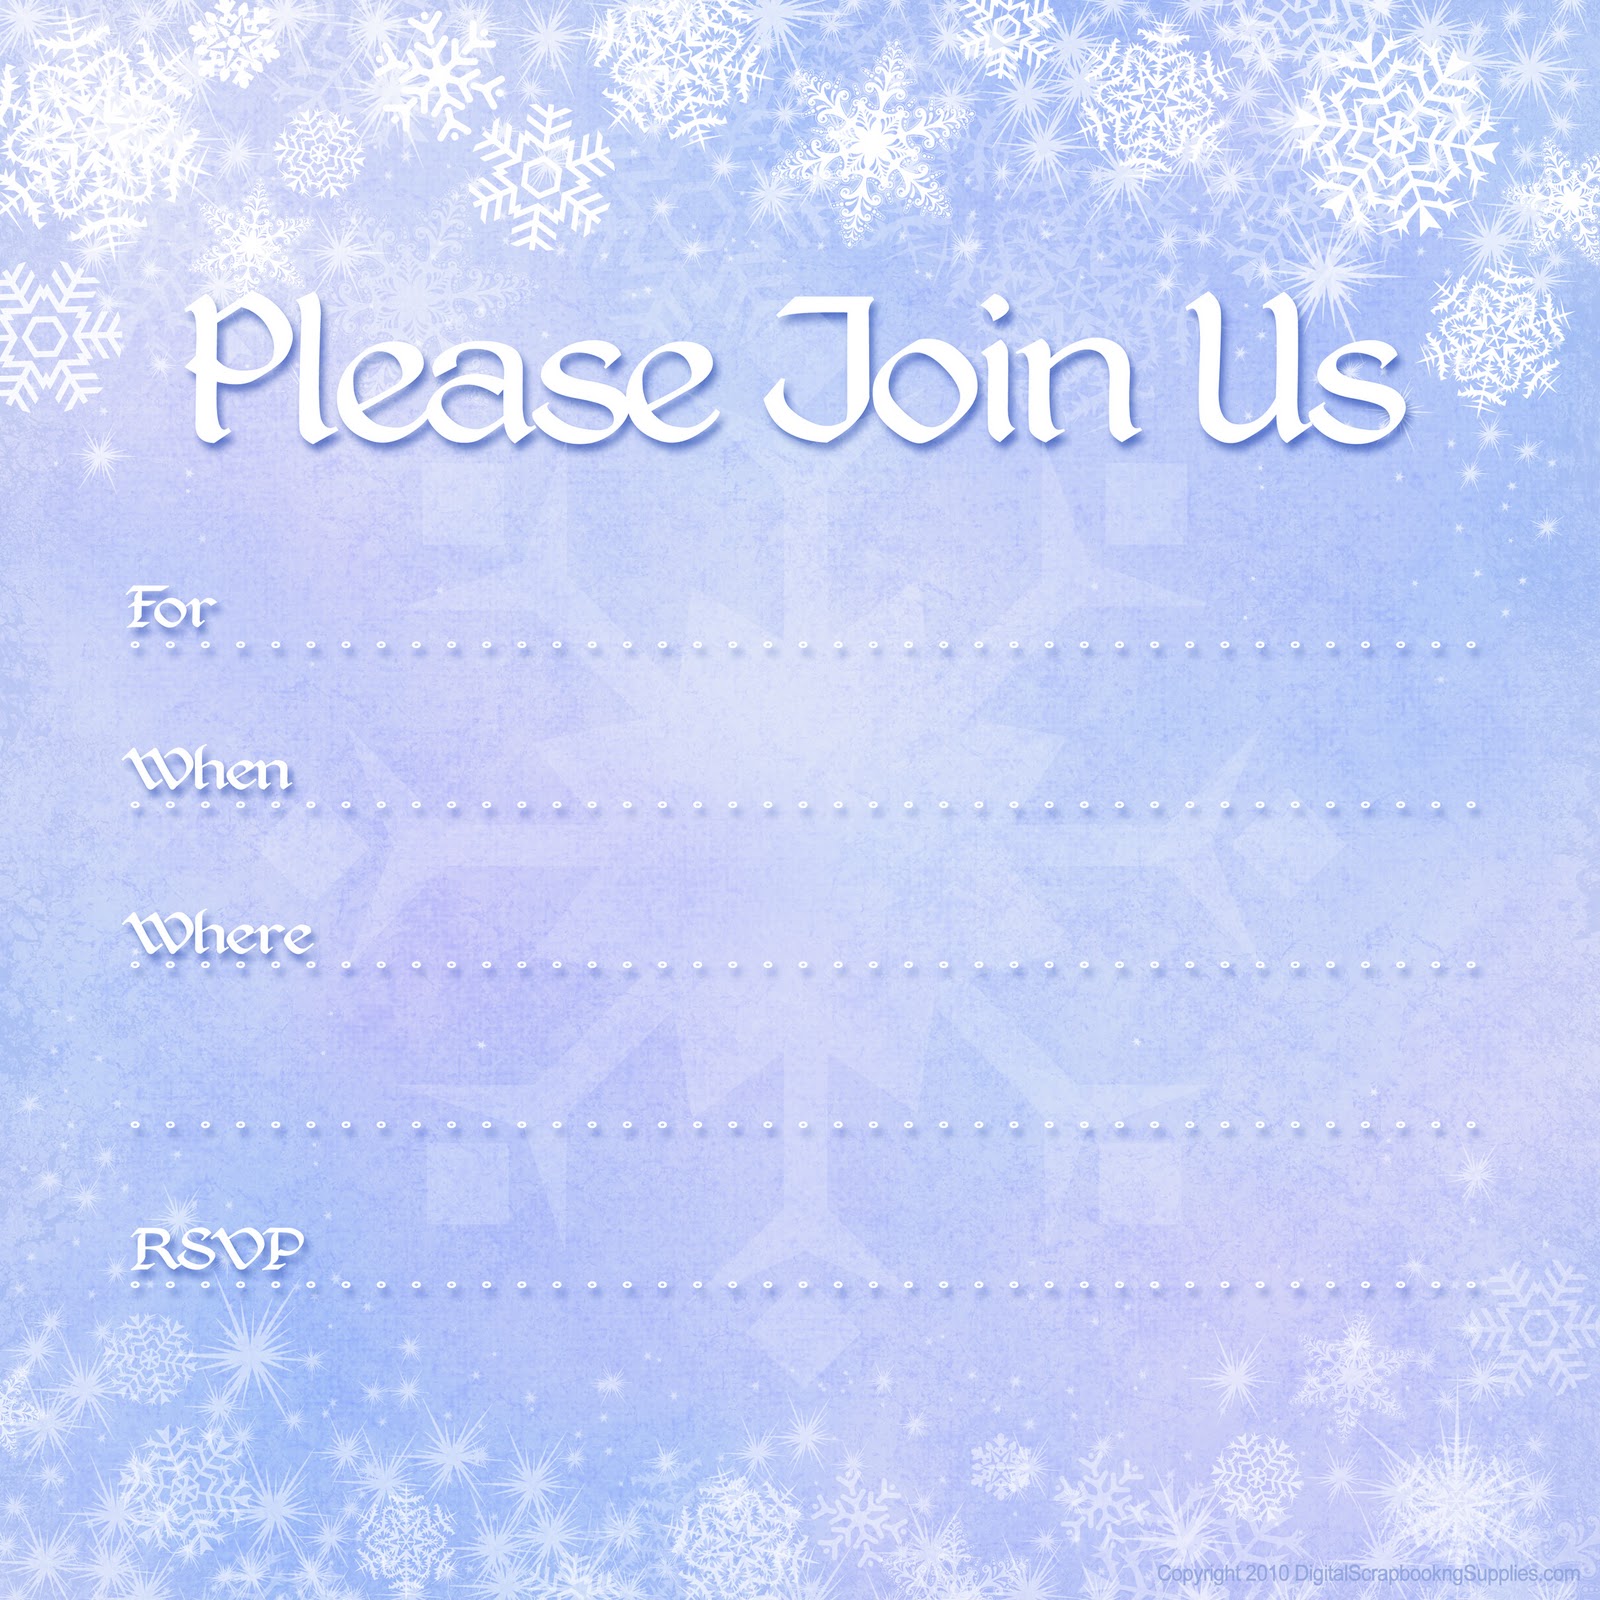 on the no-cost printable winter snowflake holiday invitation template ...